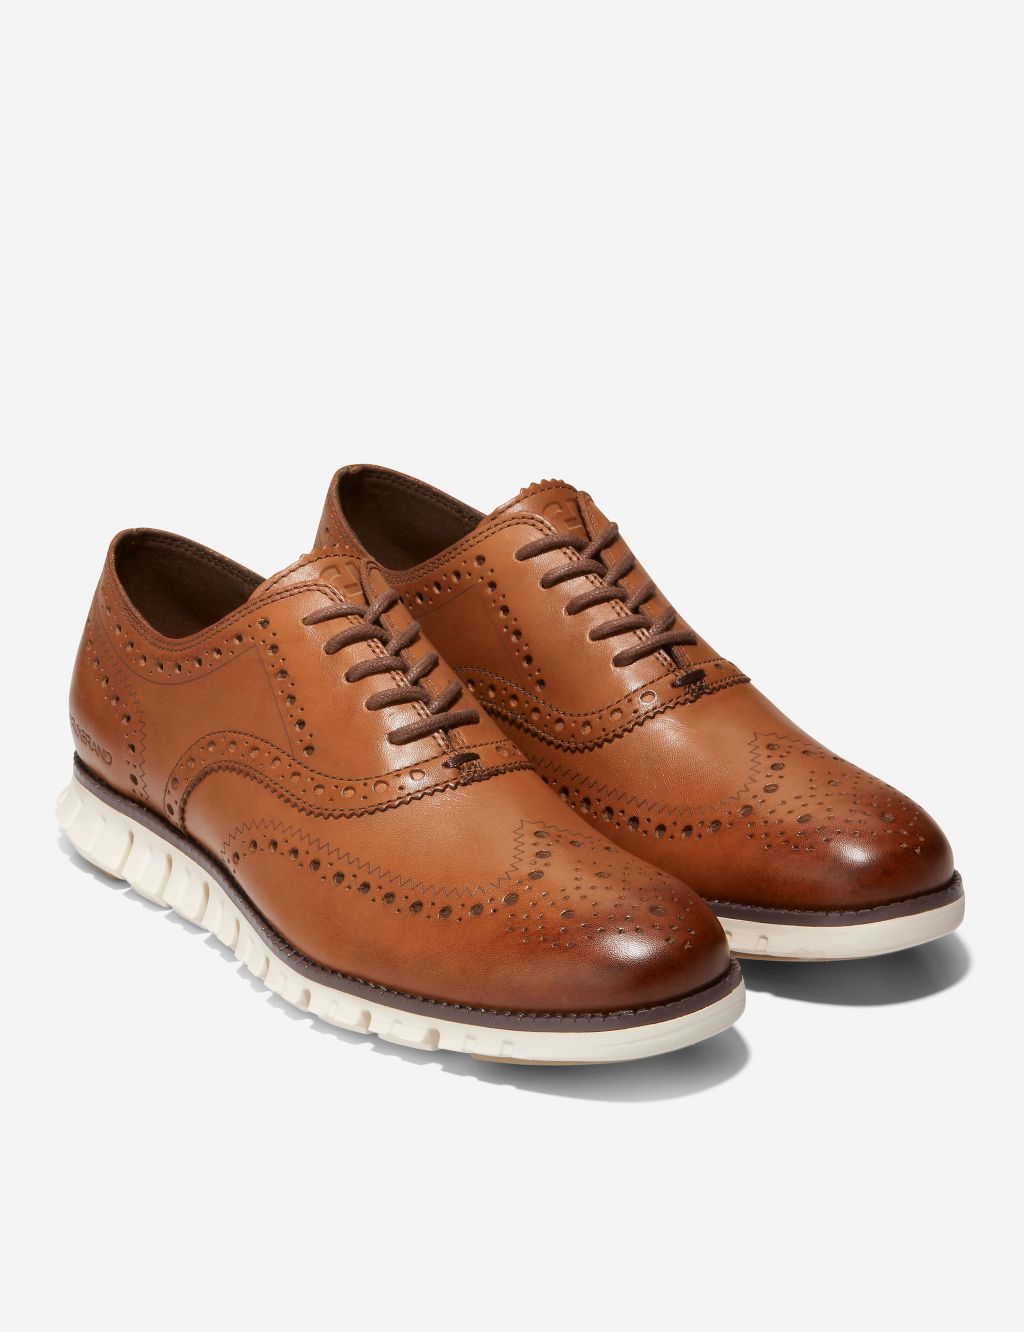 Wide Fit Zerogrand Wingtip Oxford Shoes image 2